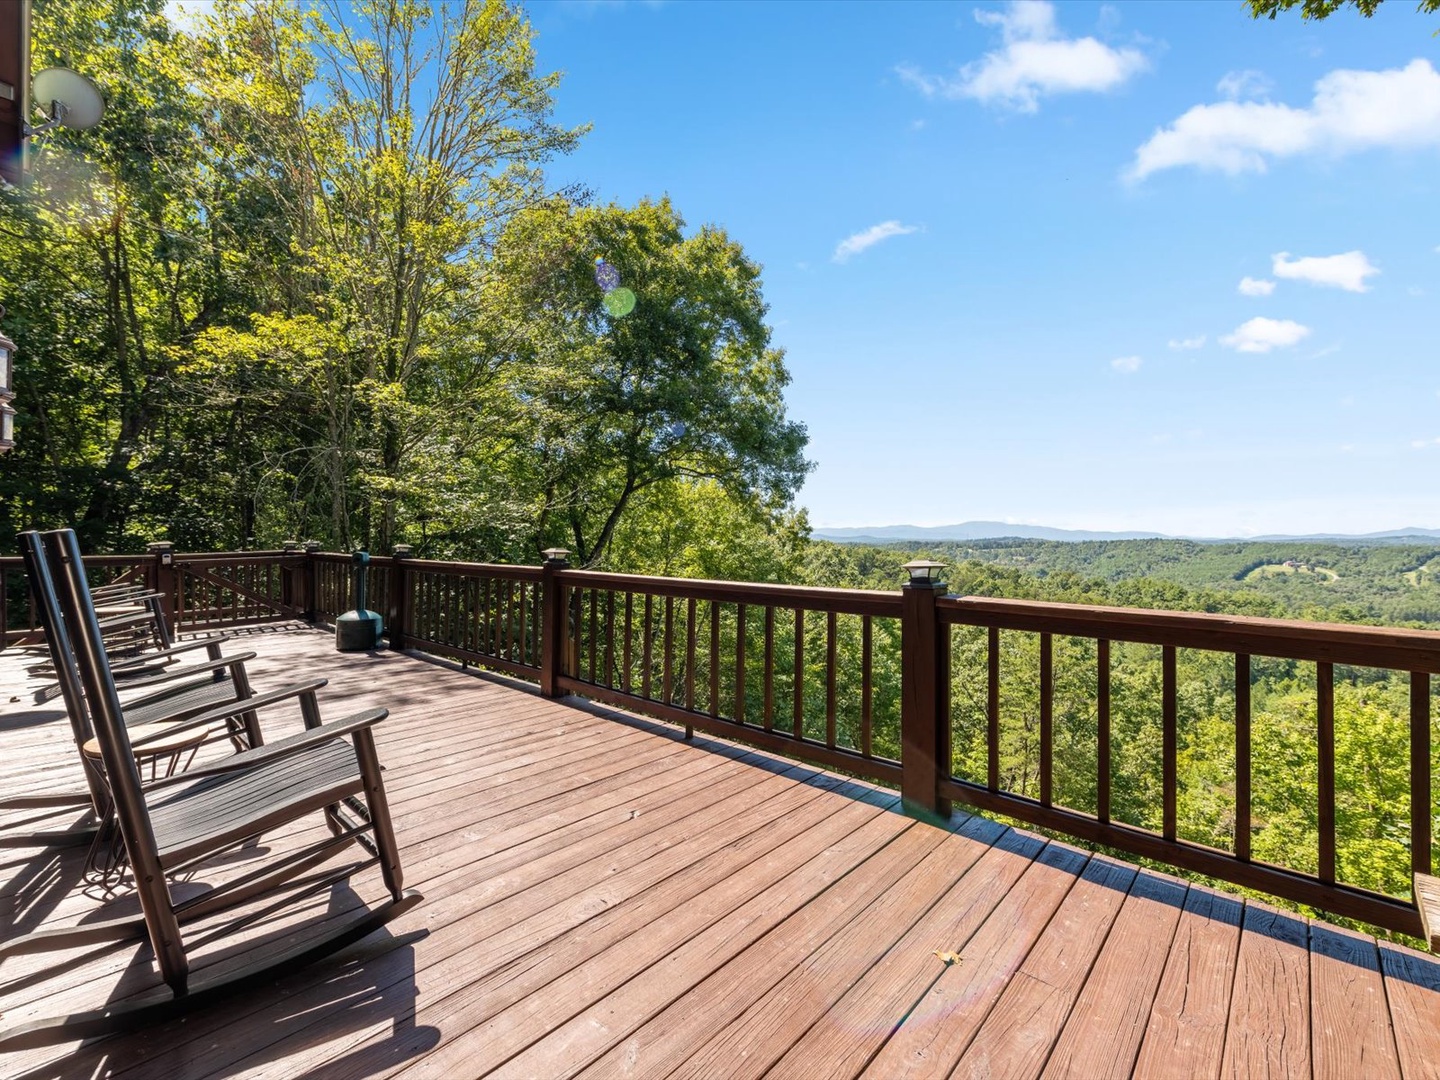 Bear Necessities: Entry level deck view of the cabin with outdoor seating